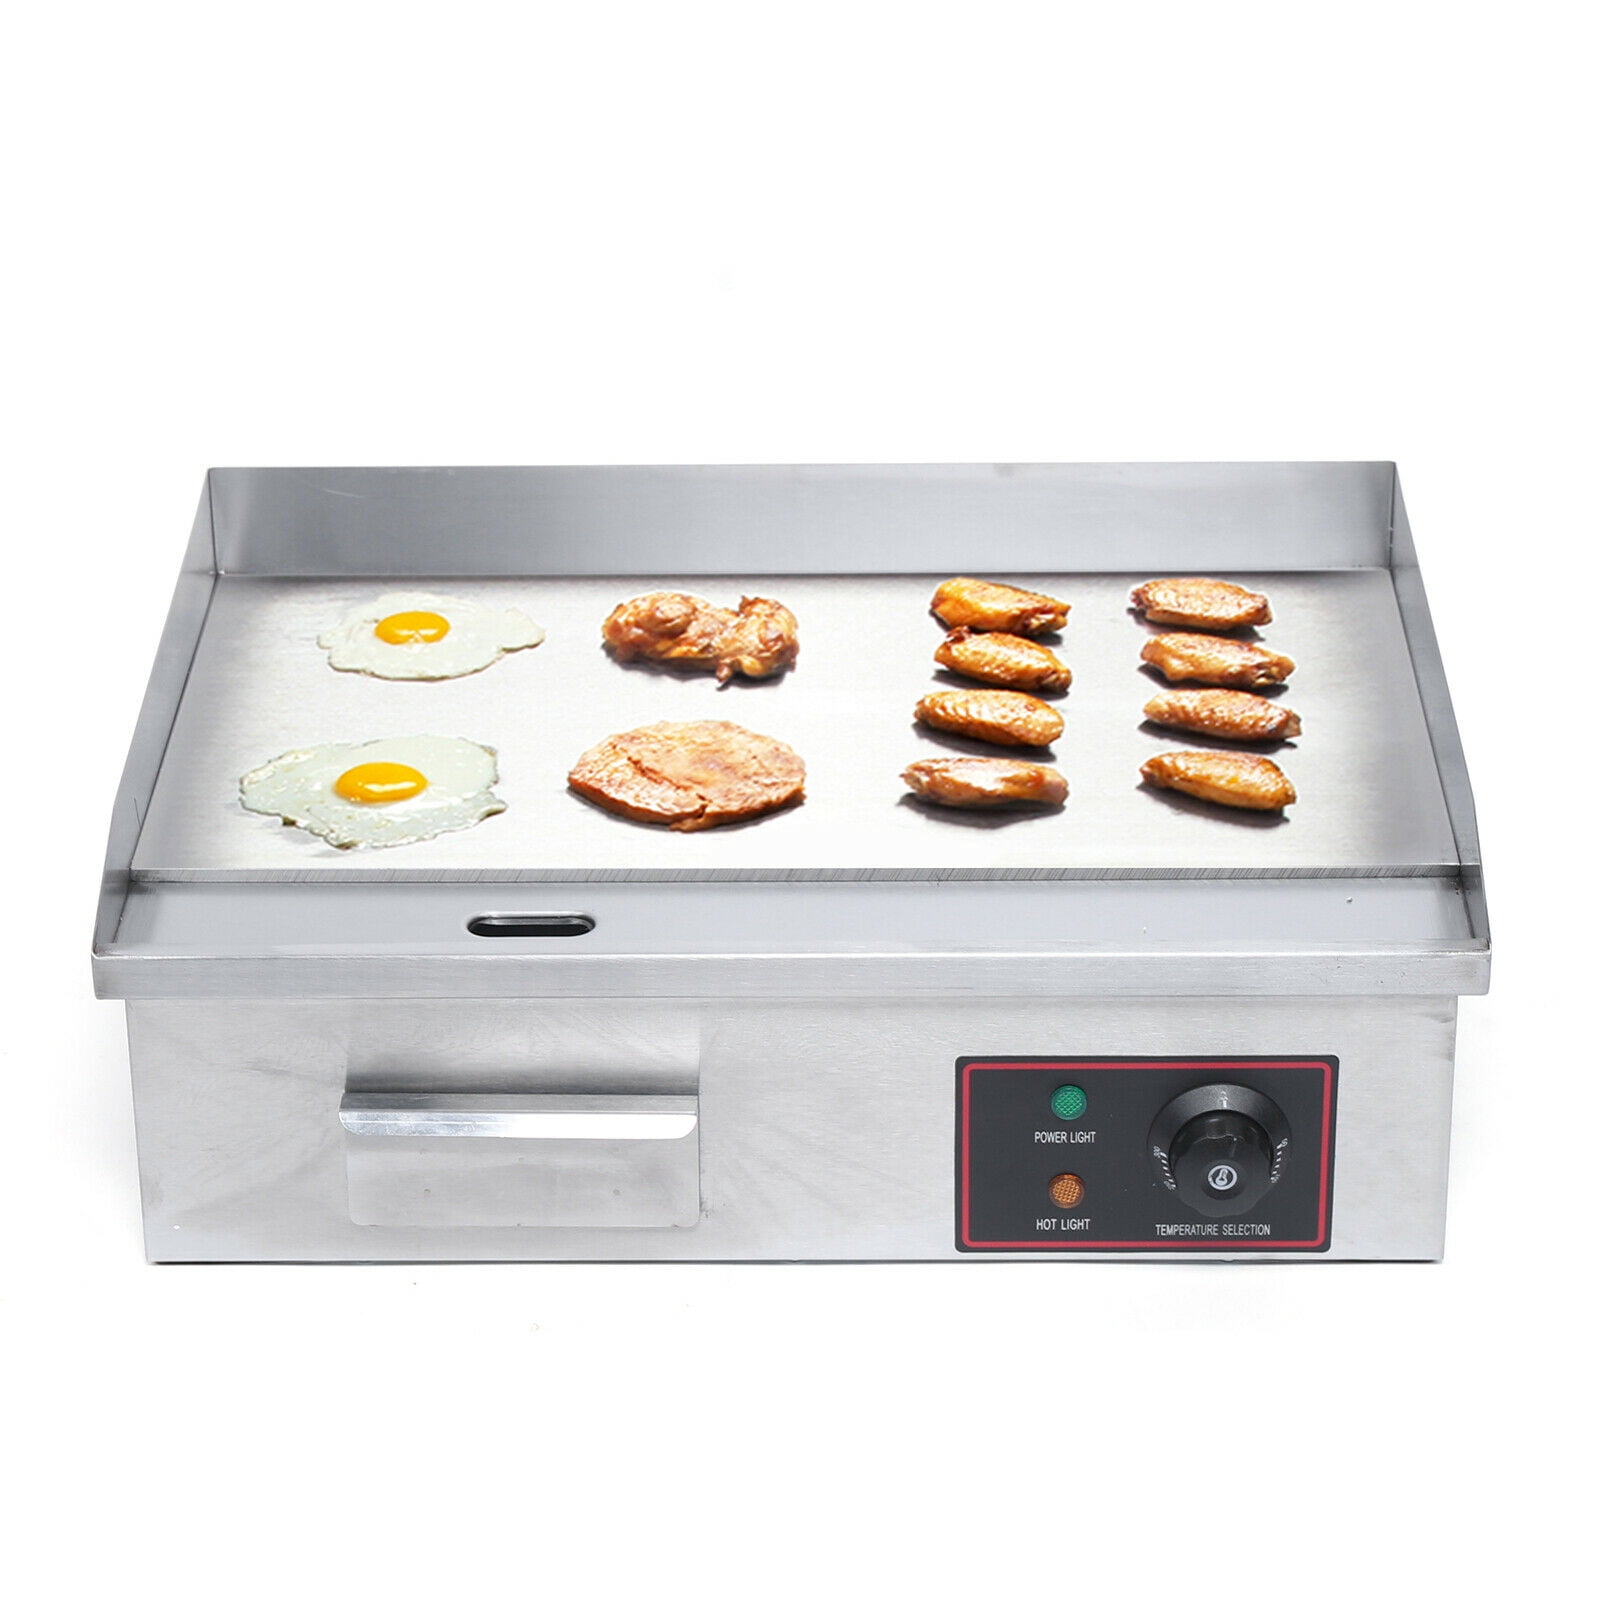 CE Flat Top Grill Hot Plate BBQ 50-300℃ Adjustable Thermostatic Control 1500W Commercial Countertop Manual Griddle 